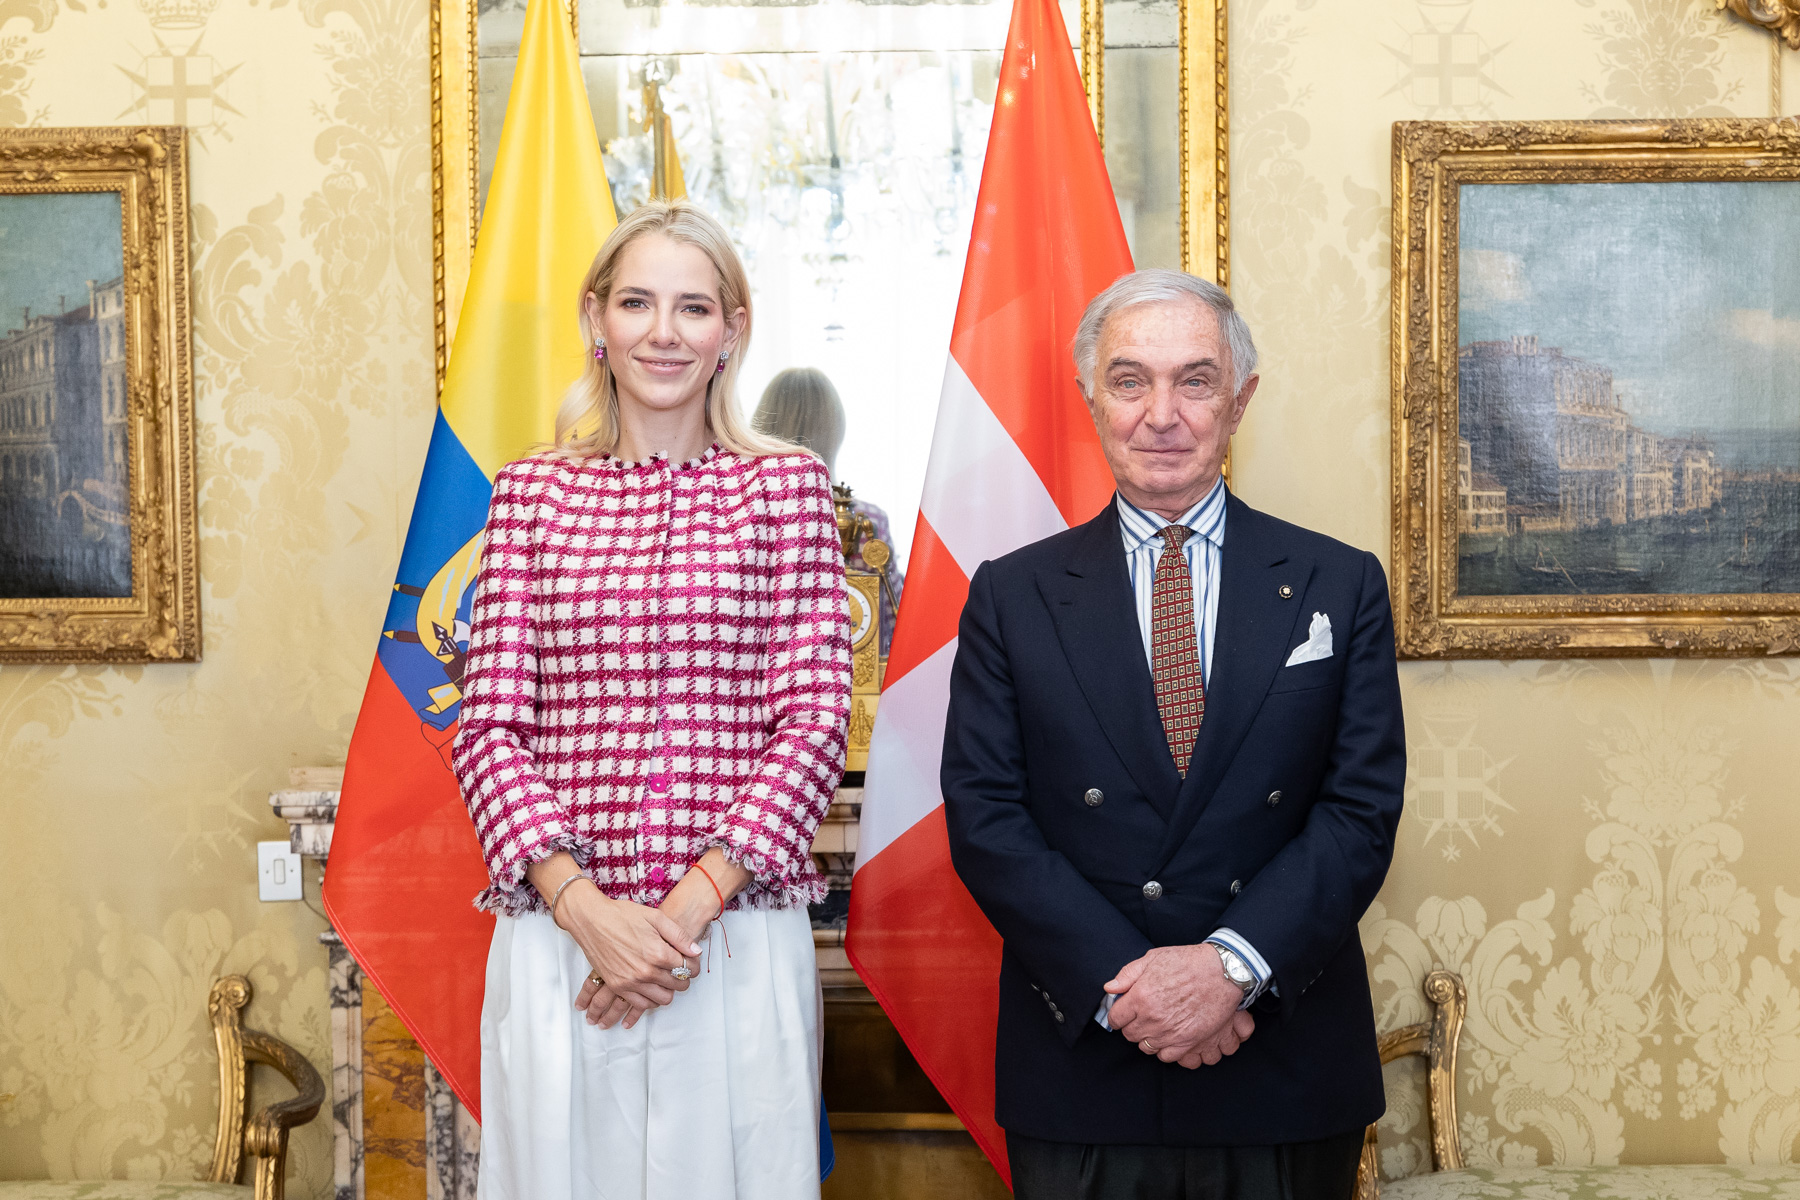 First Lady of Ecuador meets Grand Chancellor in Magistral Palace